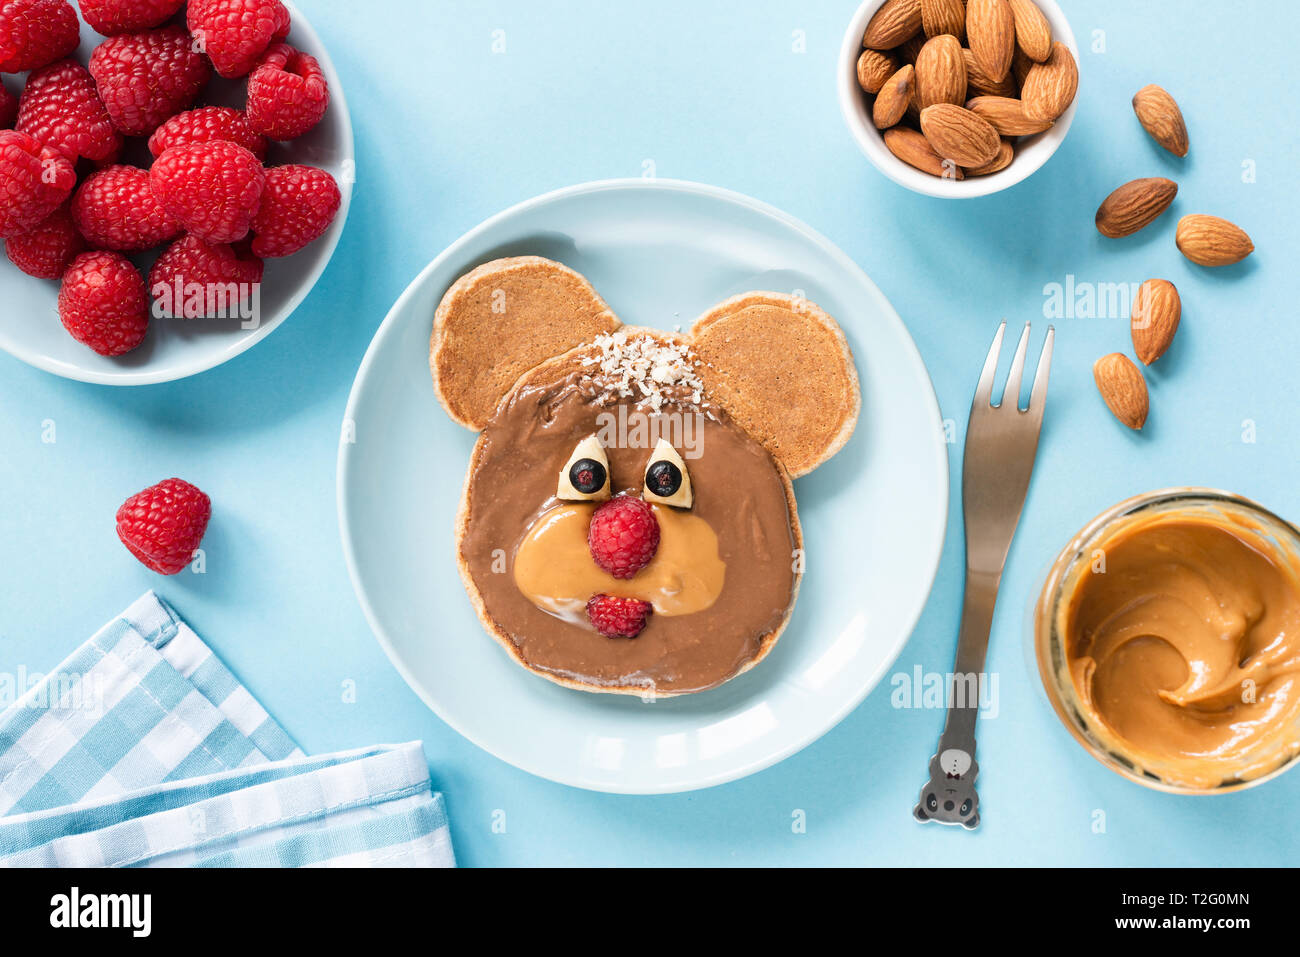 Cute funny pancake food art for kids. Bear or dog shaped pancake with peanut butter and berries. Blue background. Healthy colorful children breakfast Stock Photo